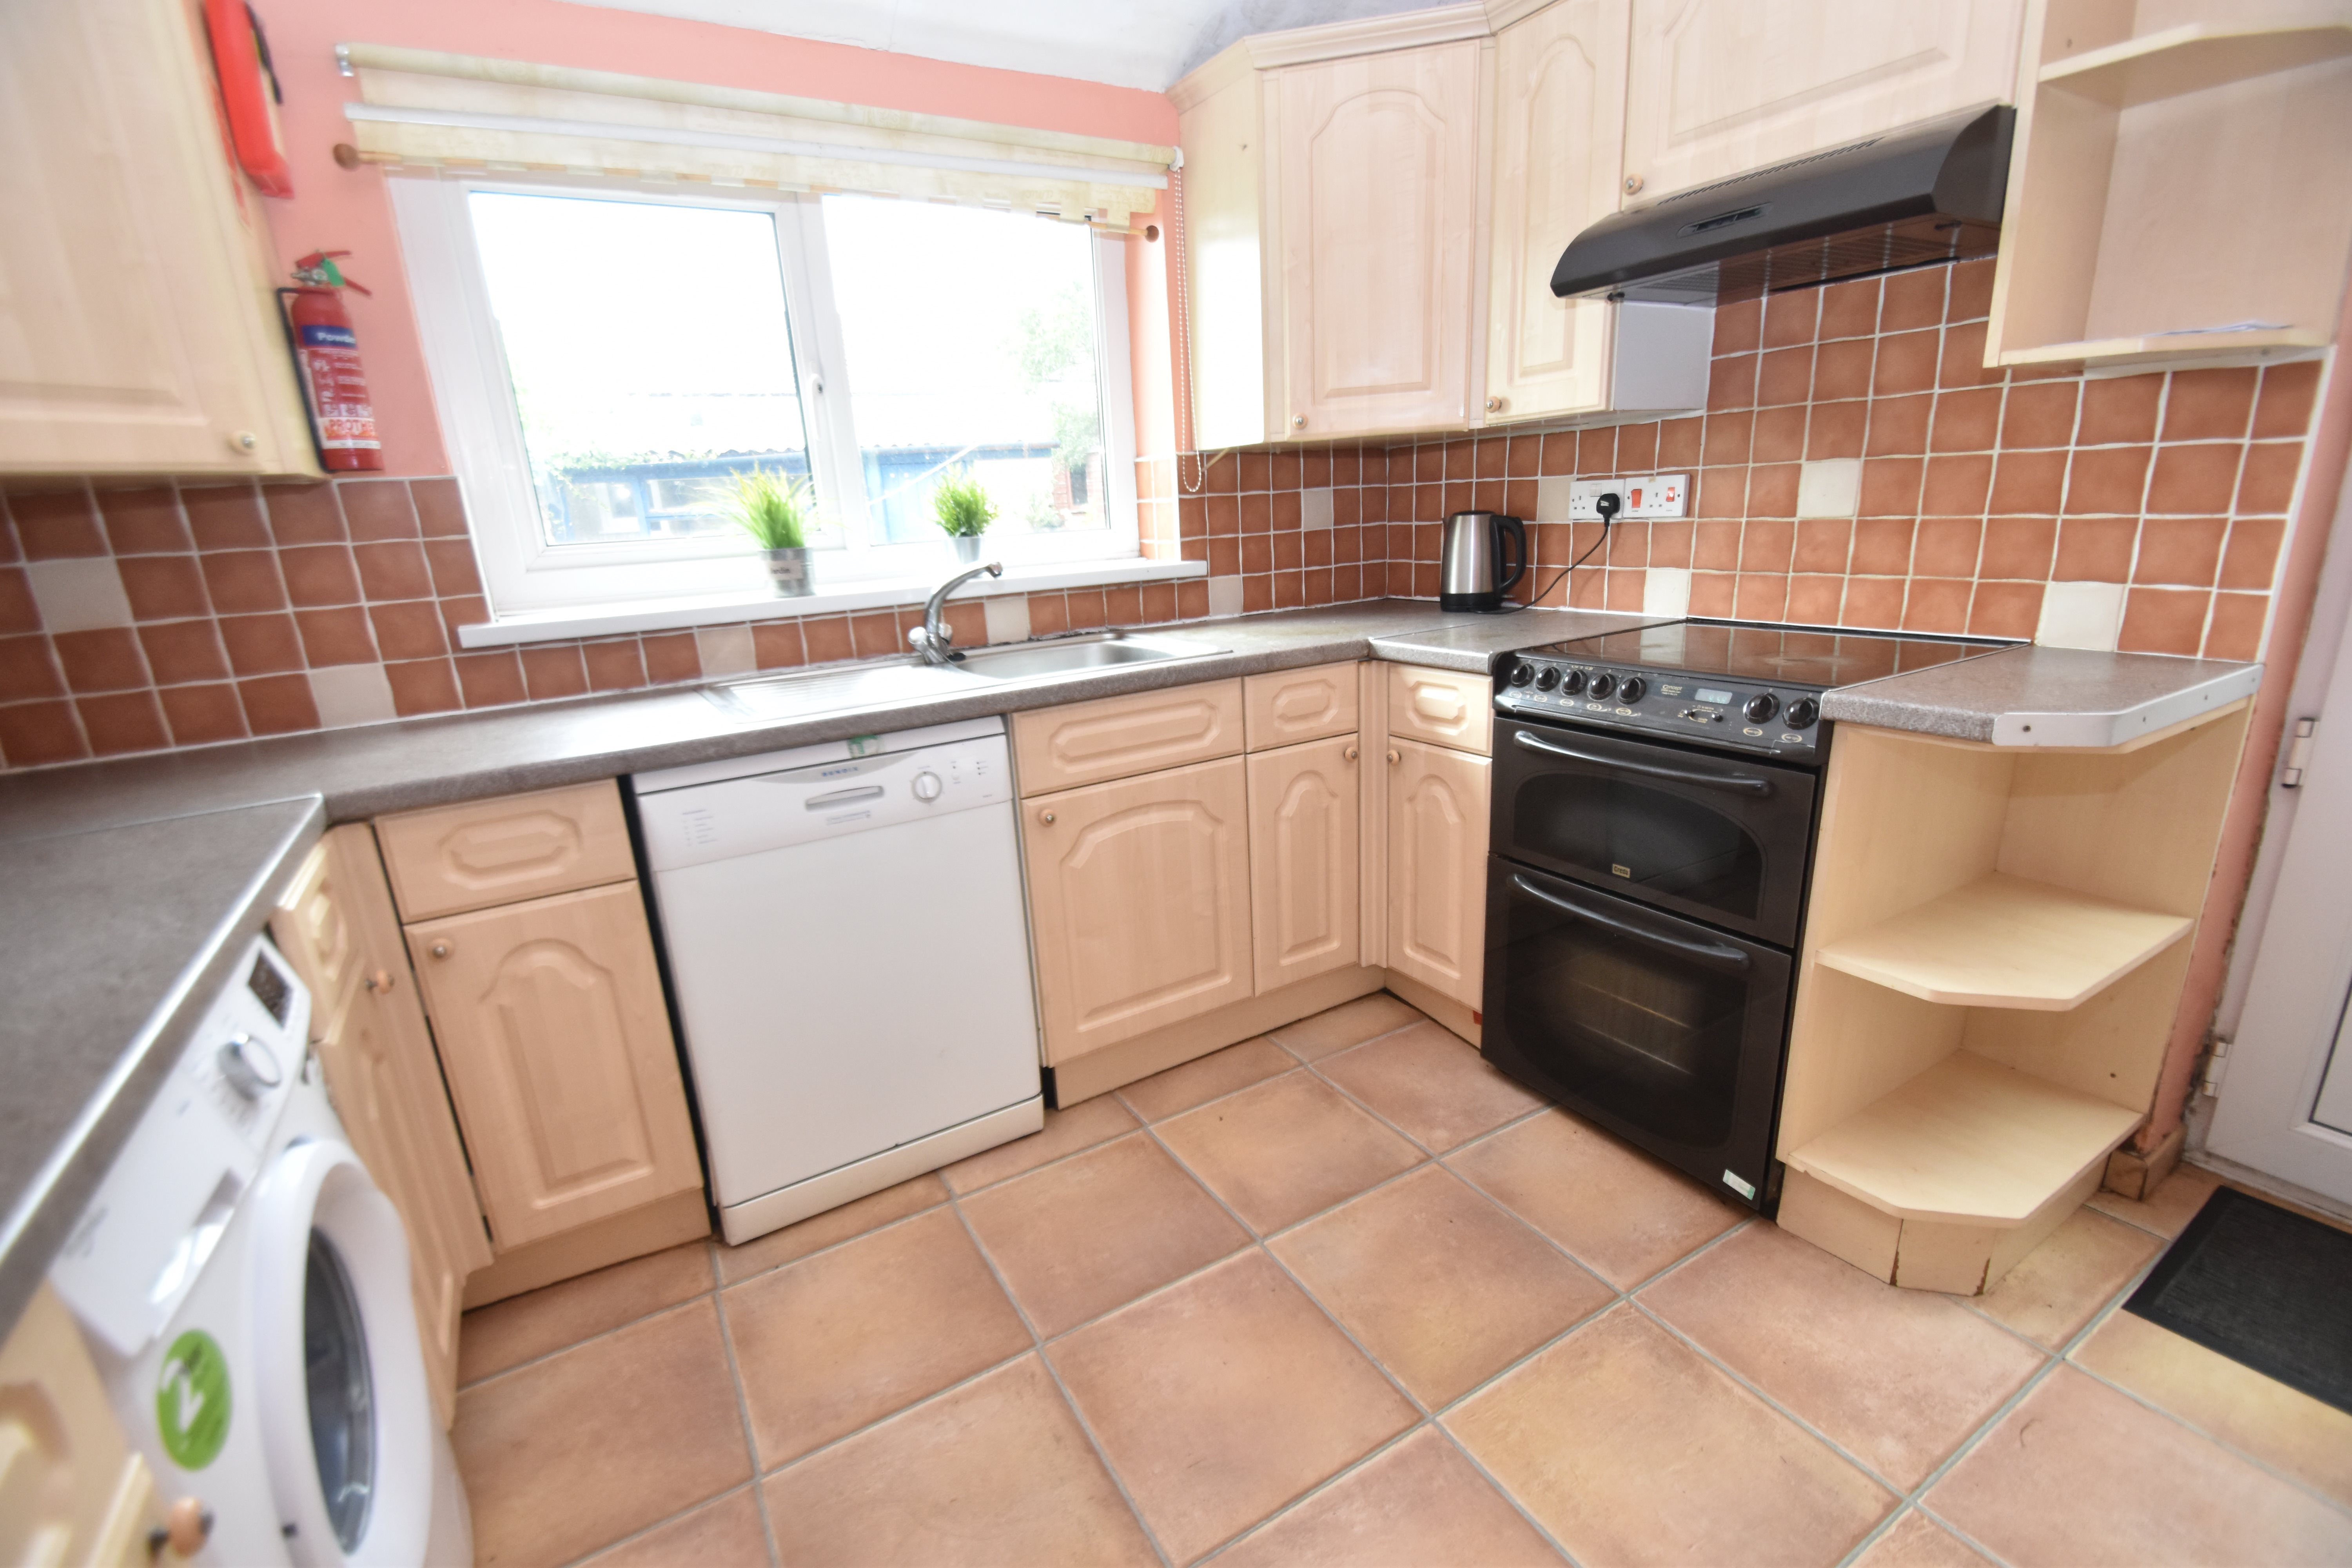 4 bed house to rent in Lisvane Street, Cathays 7